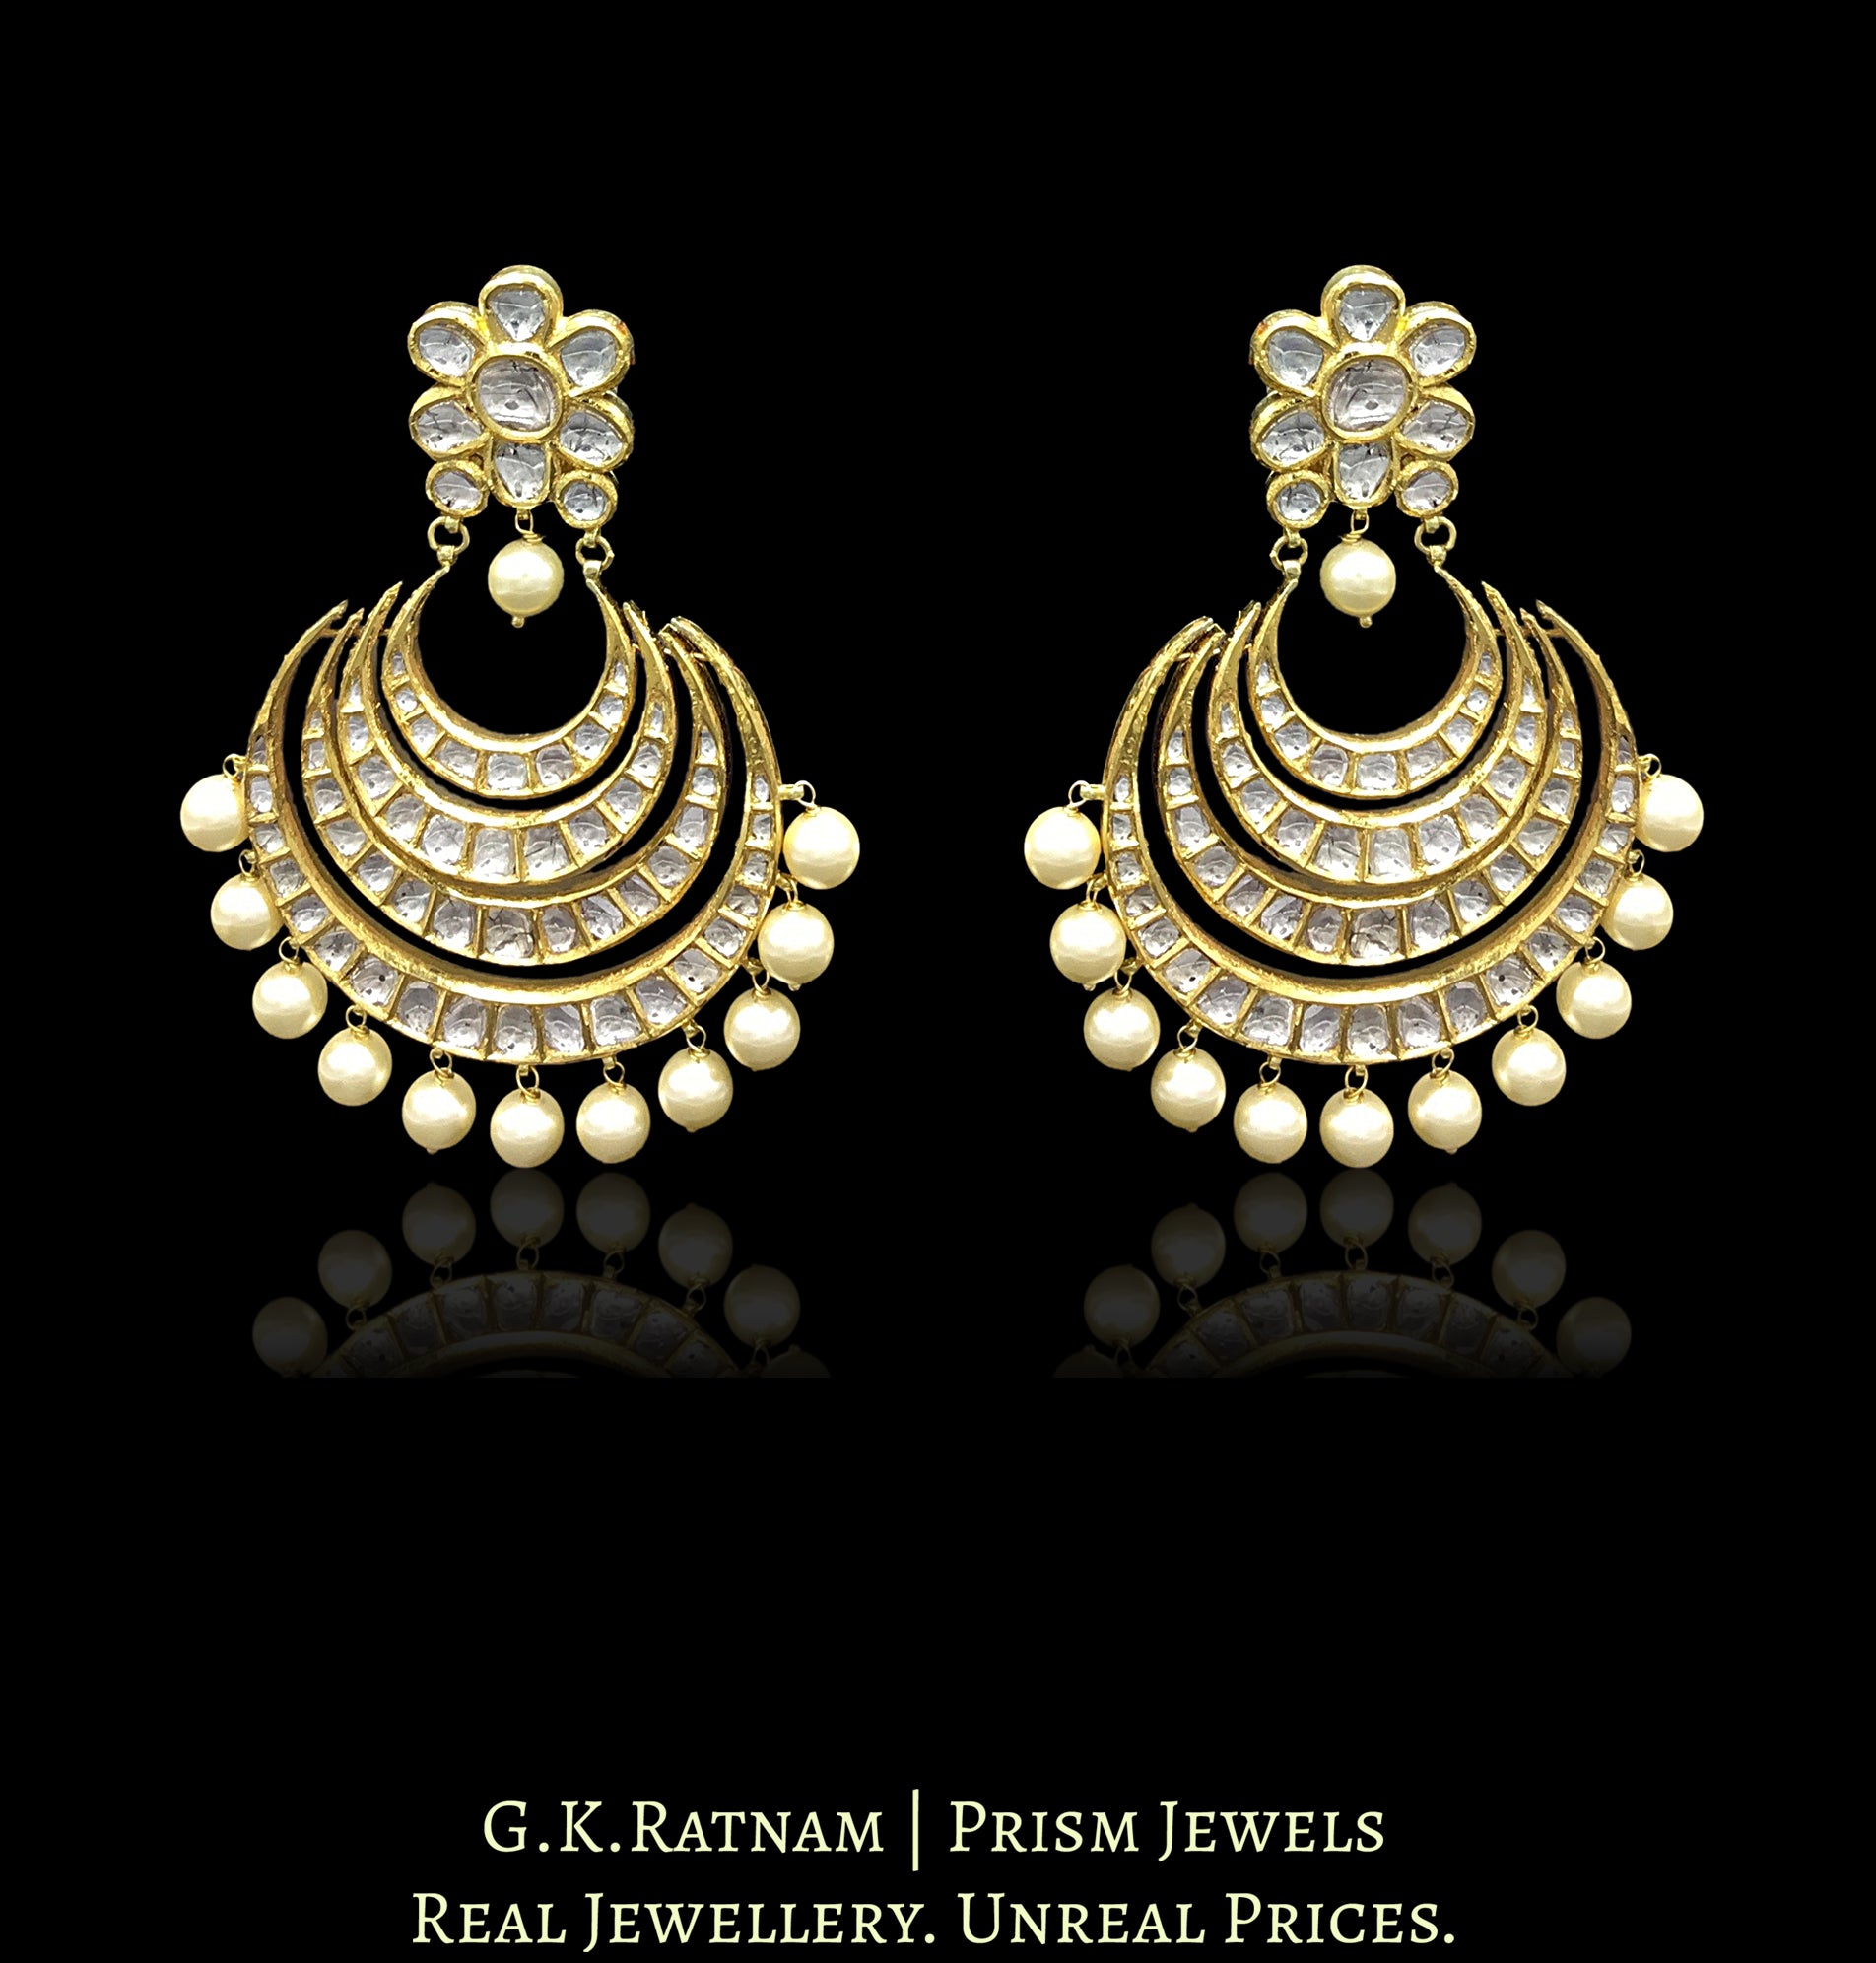 18k Gold and Diamond Polki Chand Bali Earring Pair with multiple chands